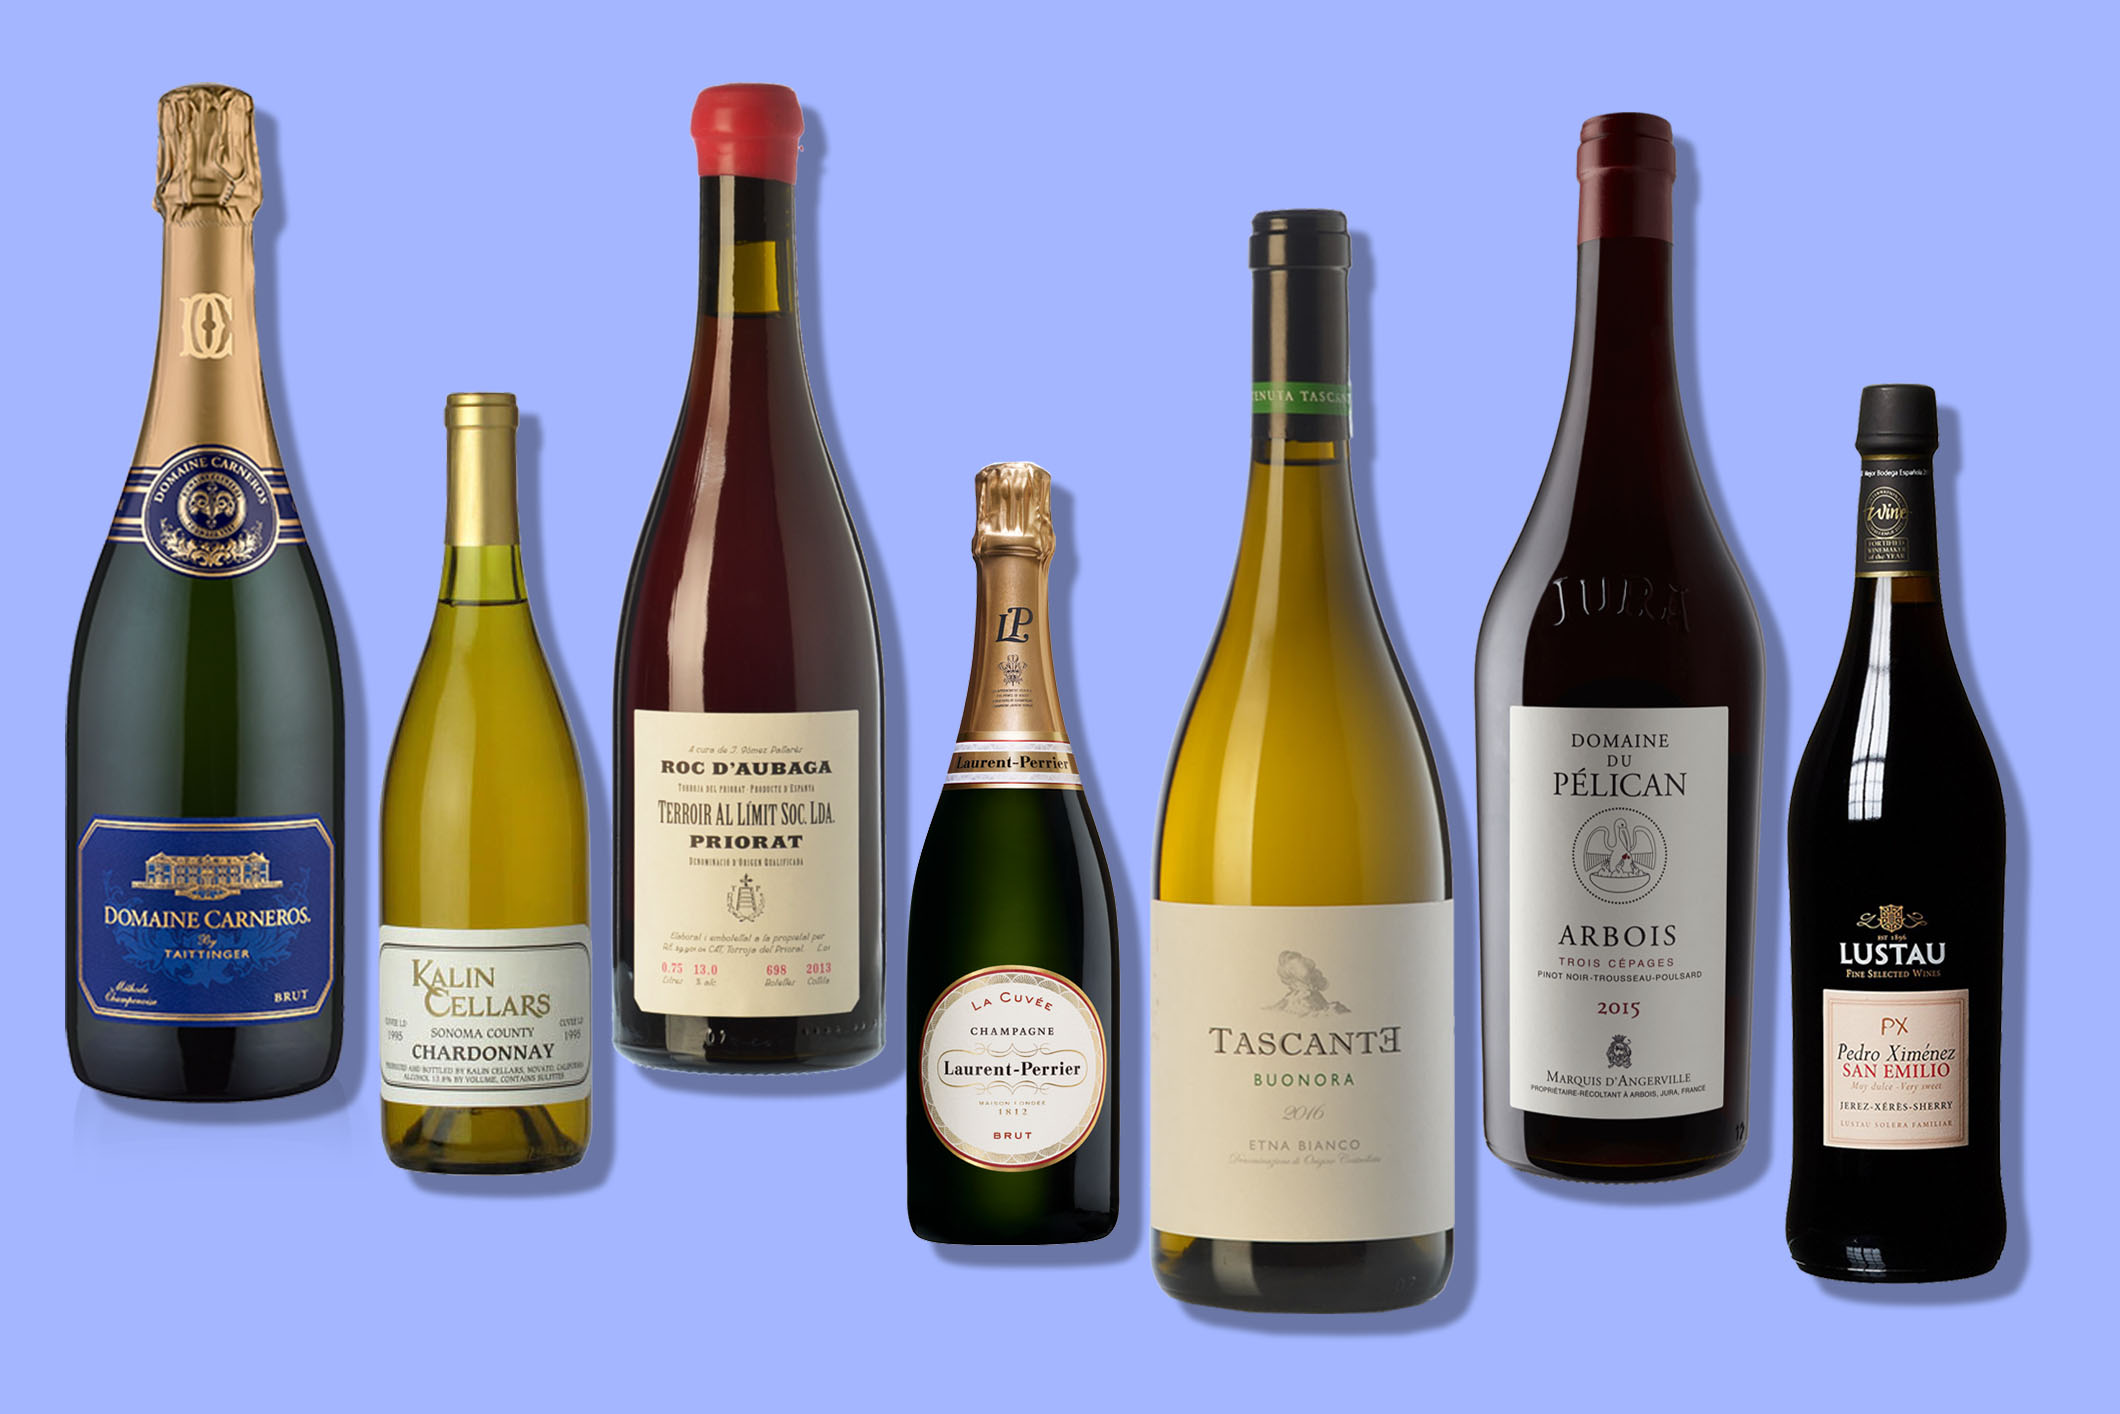 50 Best Wines Under $50: Bottles of White, Red, Champagne, Rose